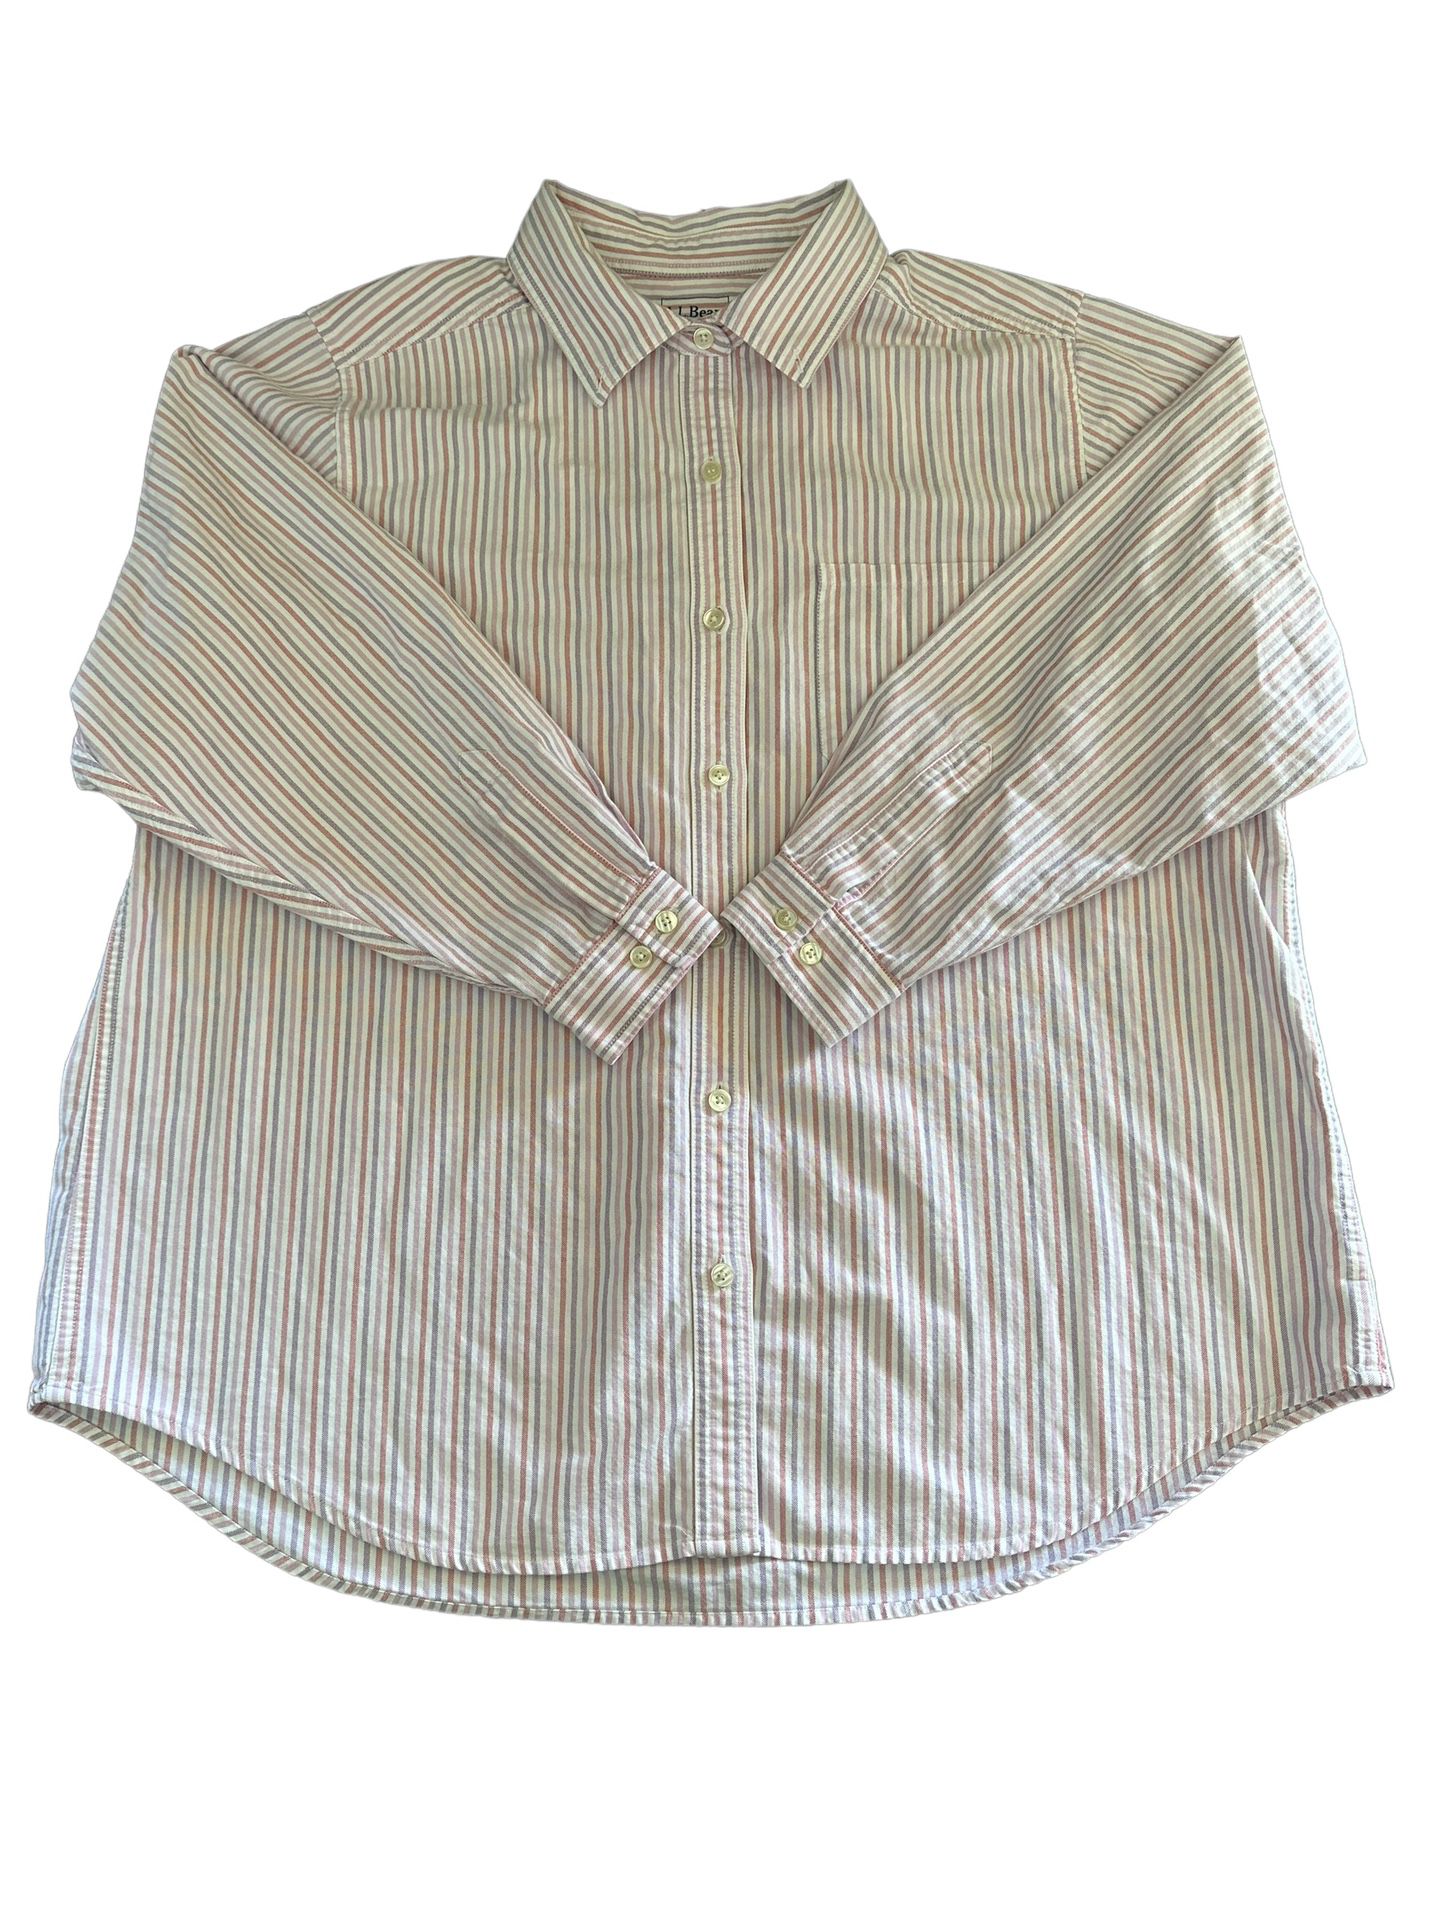 LL Bean Shirt Womens 2X Colorful Striped Pink & Violet Pastel Cuffed Button Up